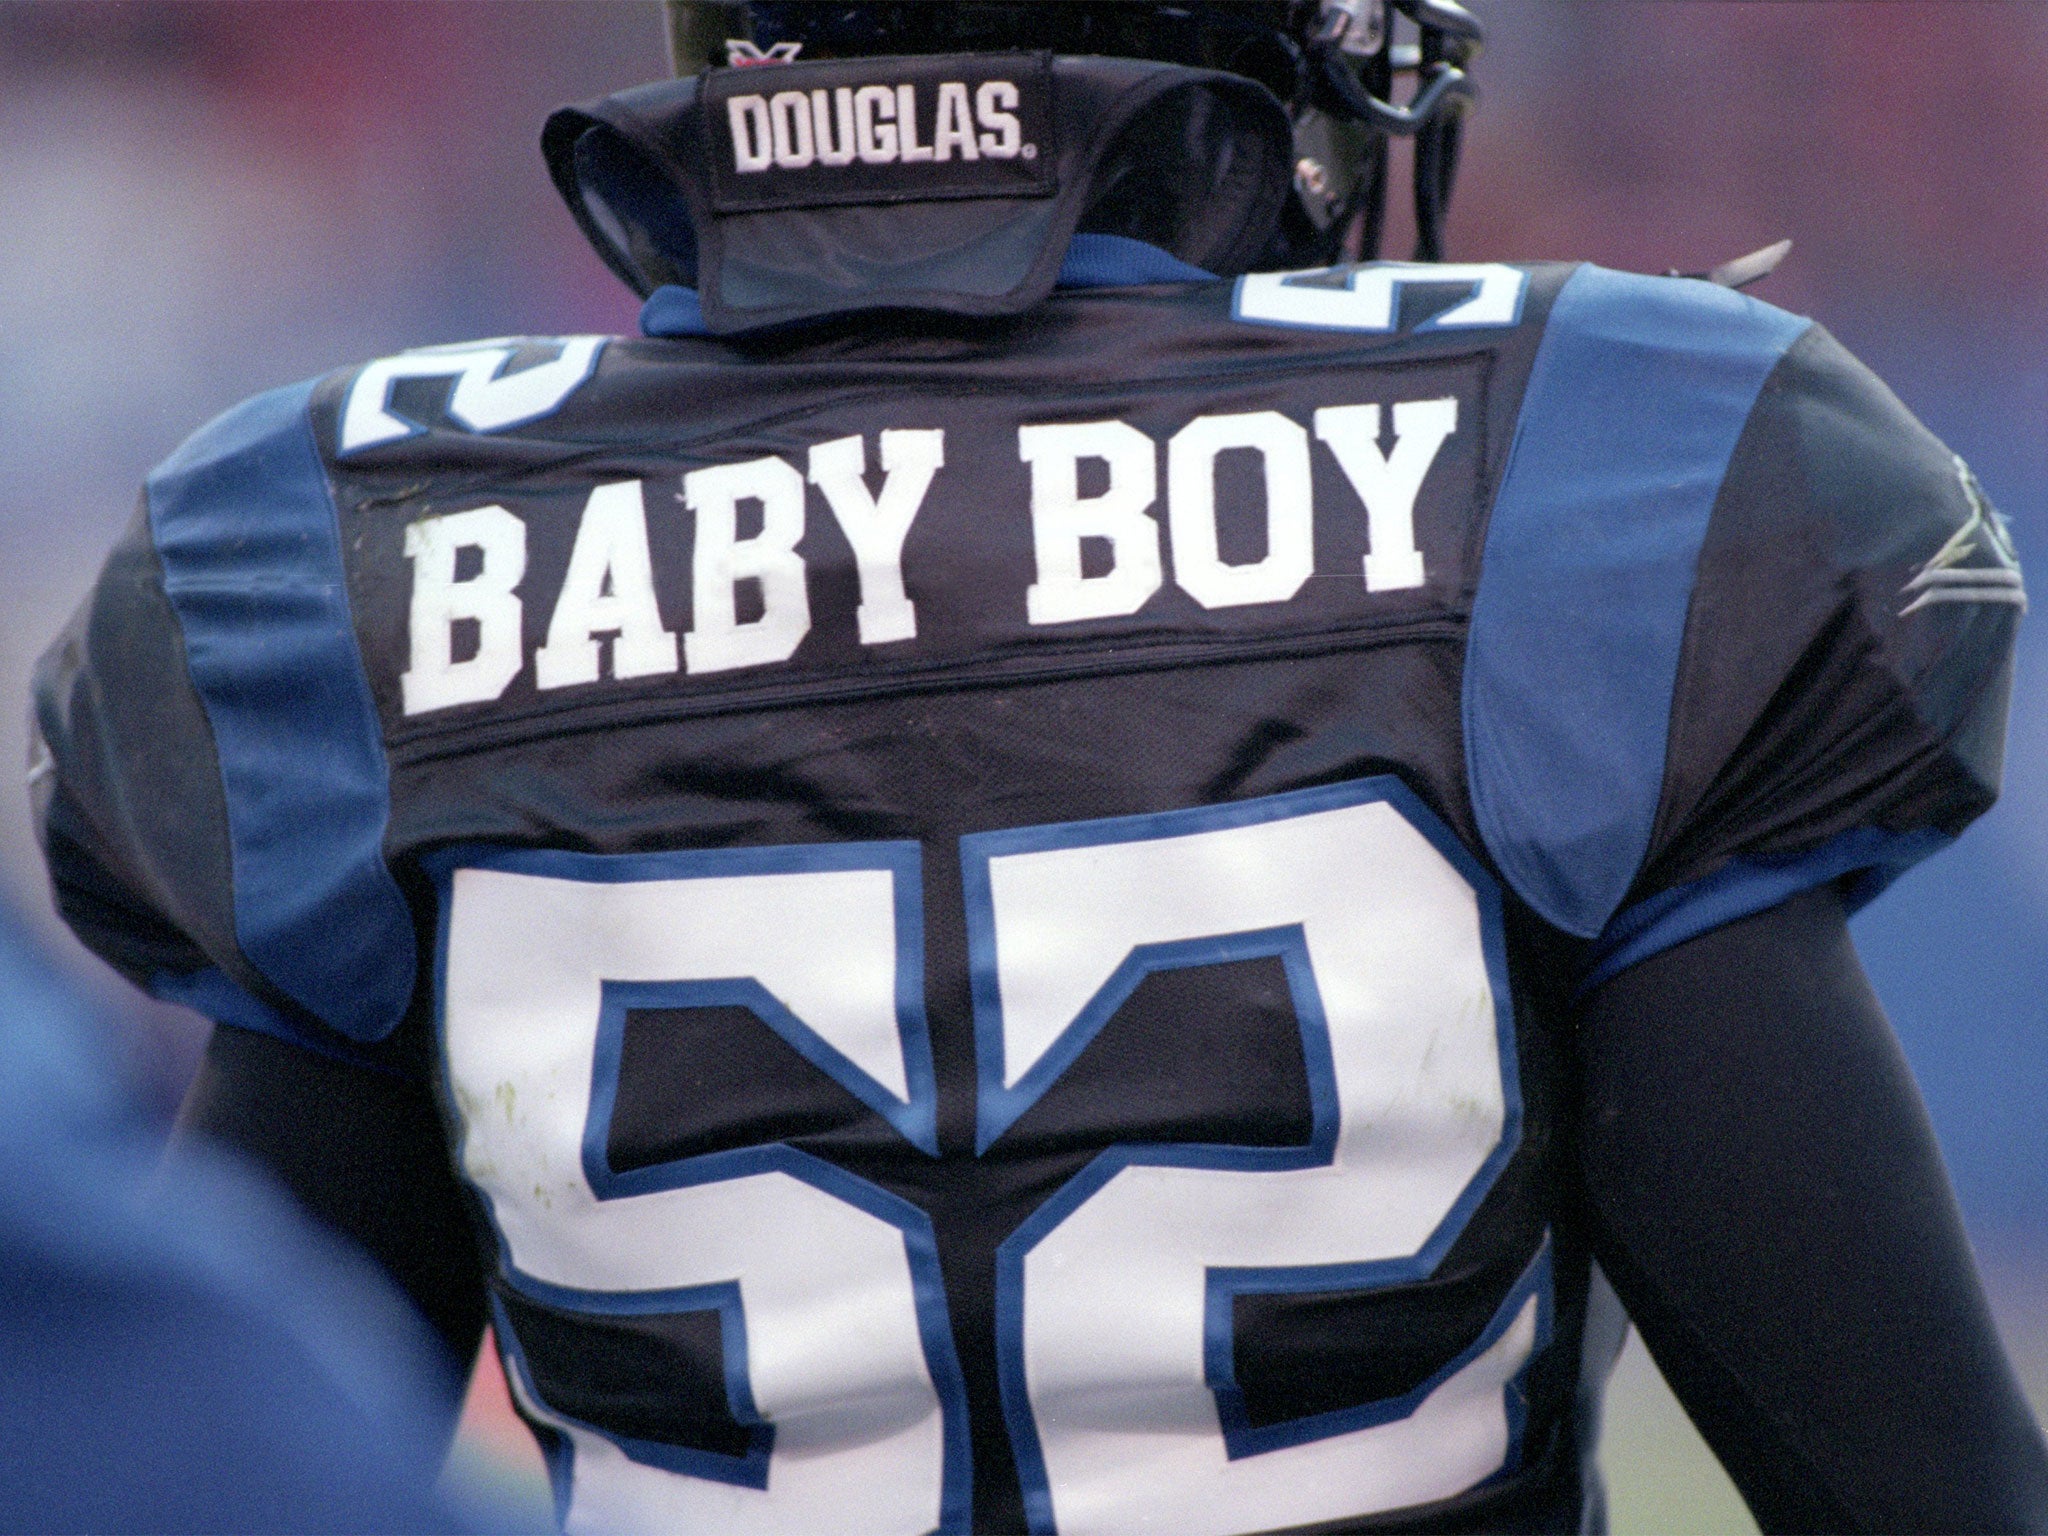 Nicknames on jerseys was another XFL gimmick